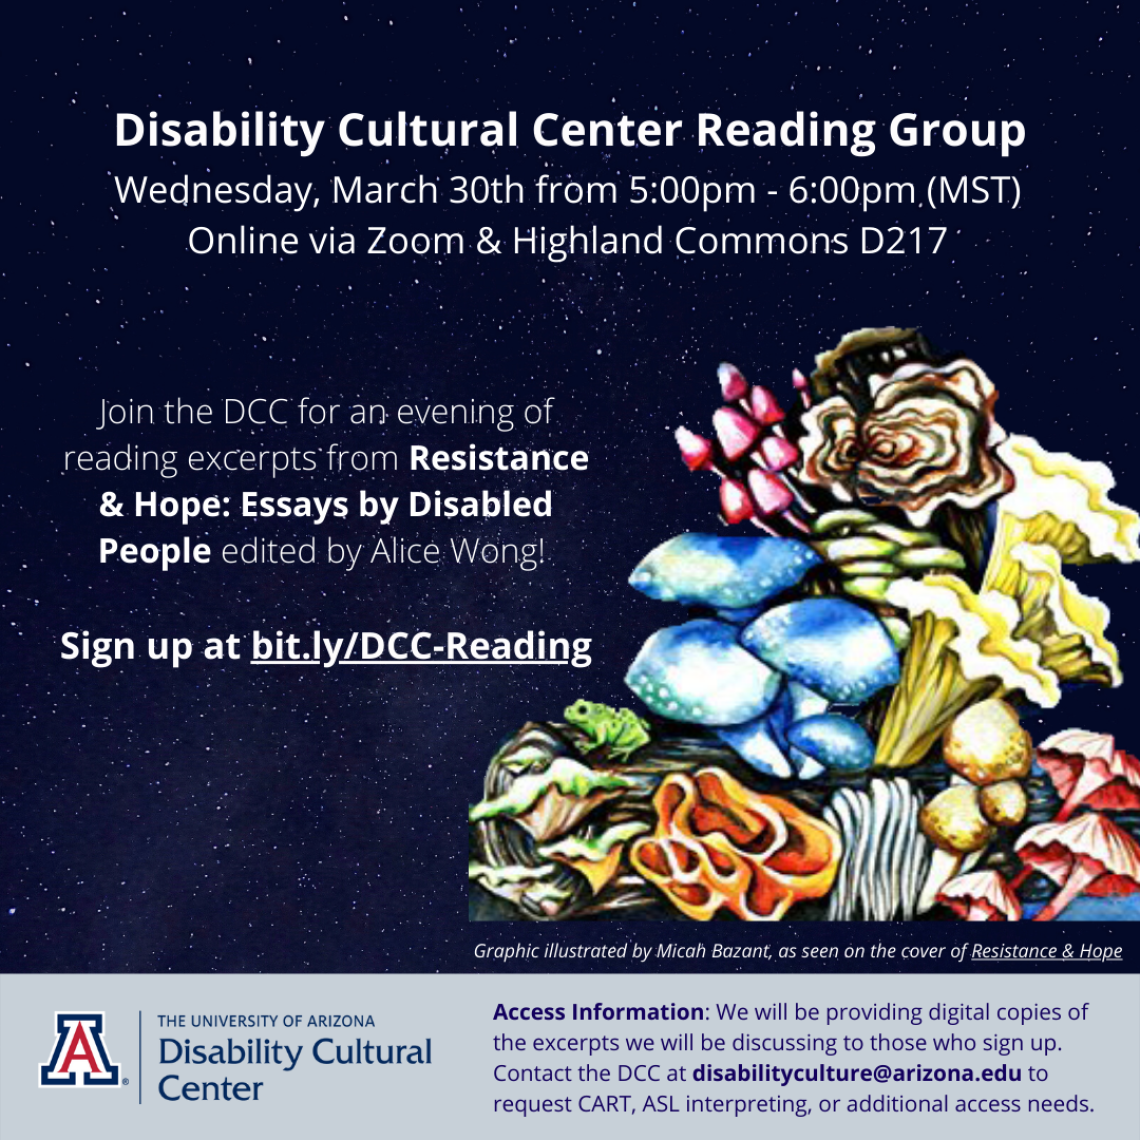 Flyer for DCC Reading Group